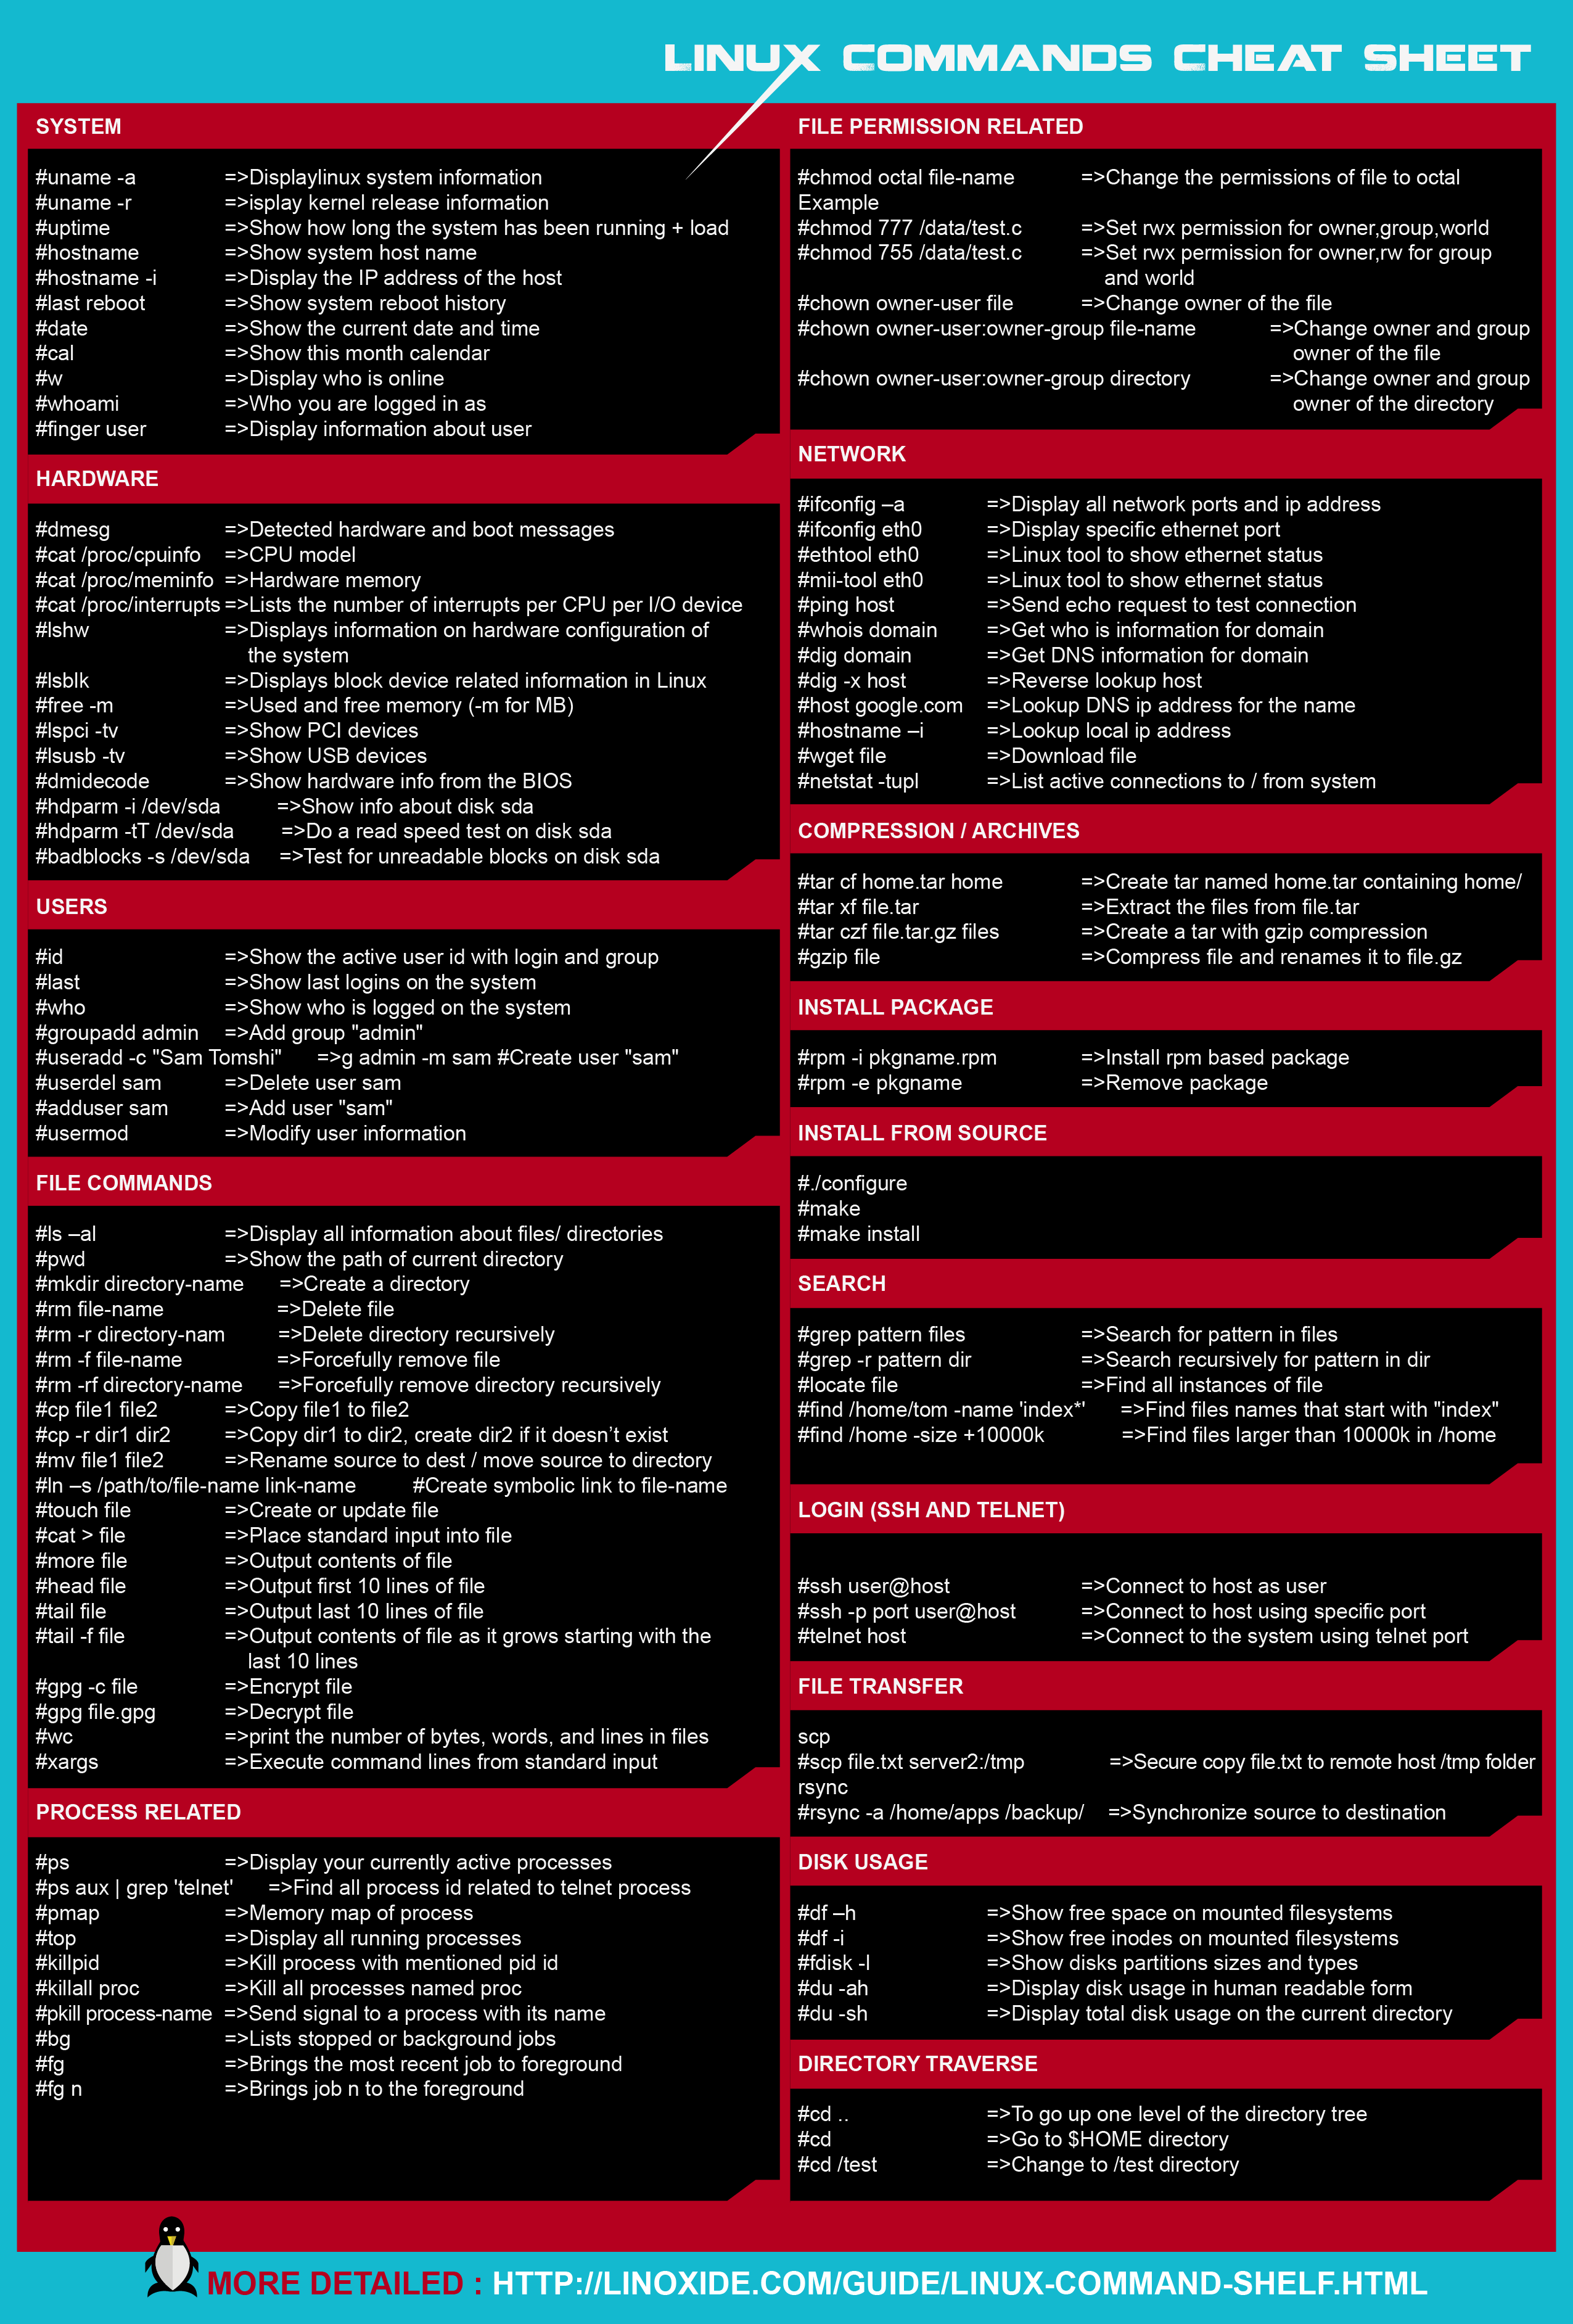 Learn Basic Linux Commands With This Downloadable Cheat Sheet